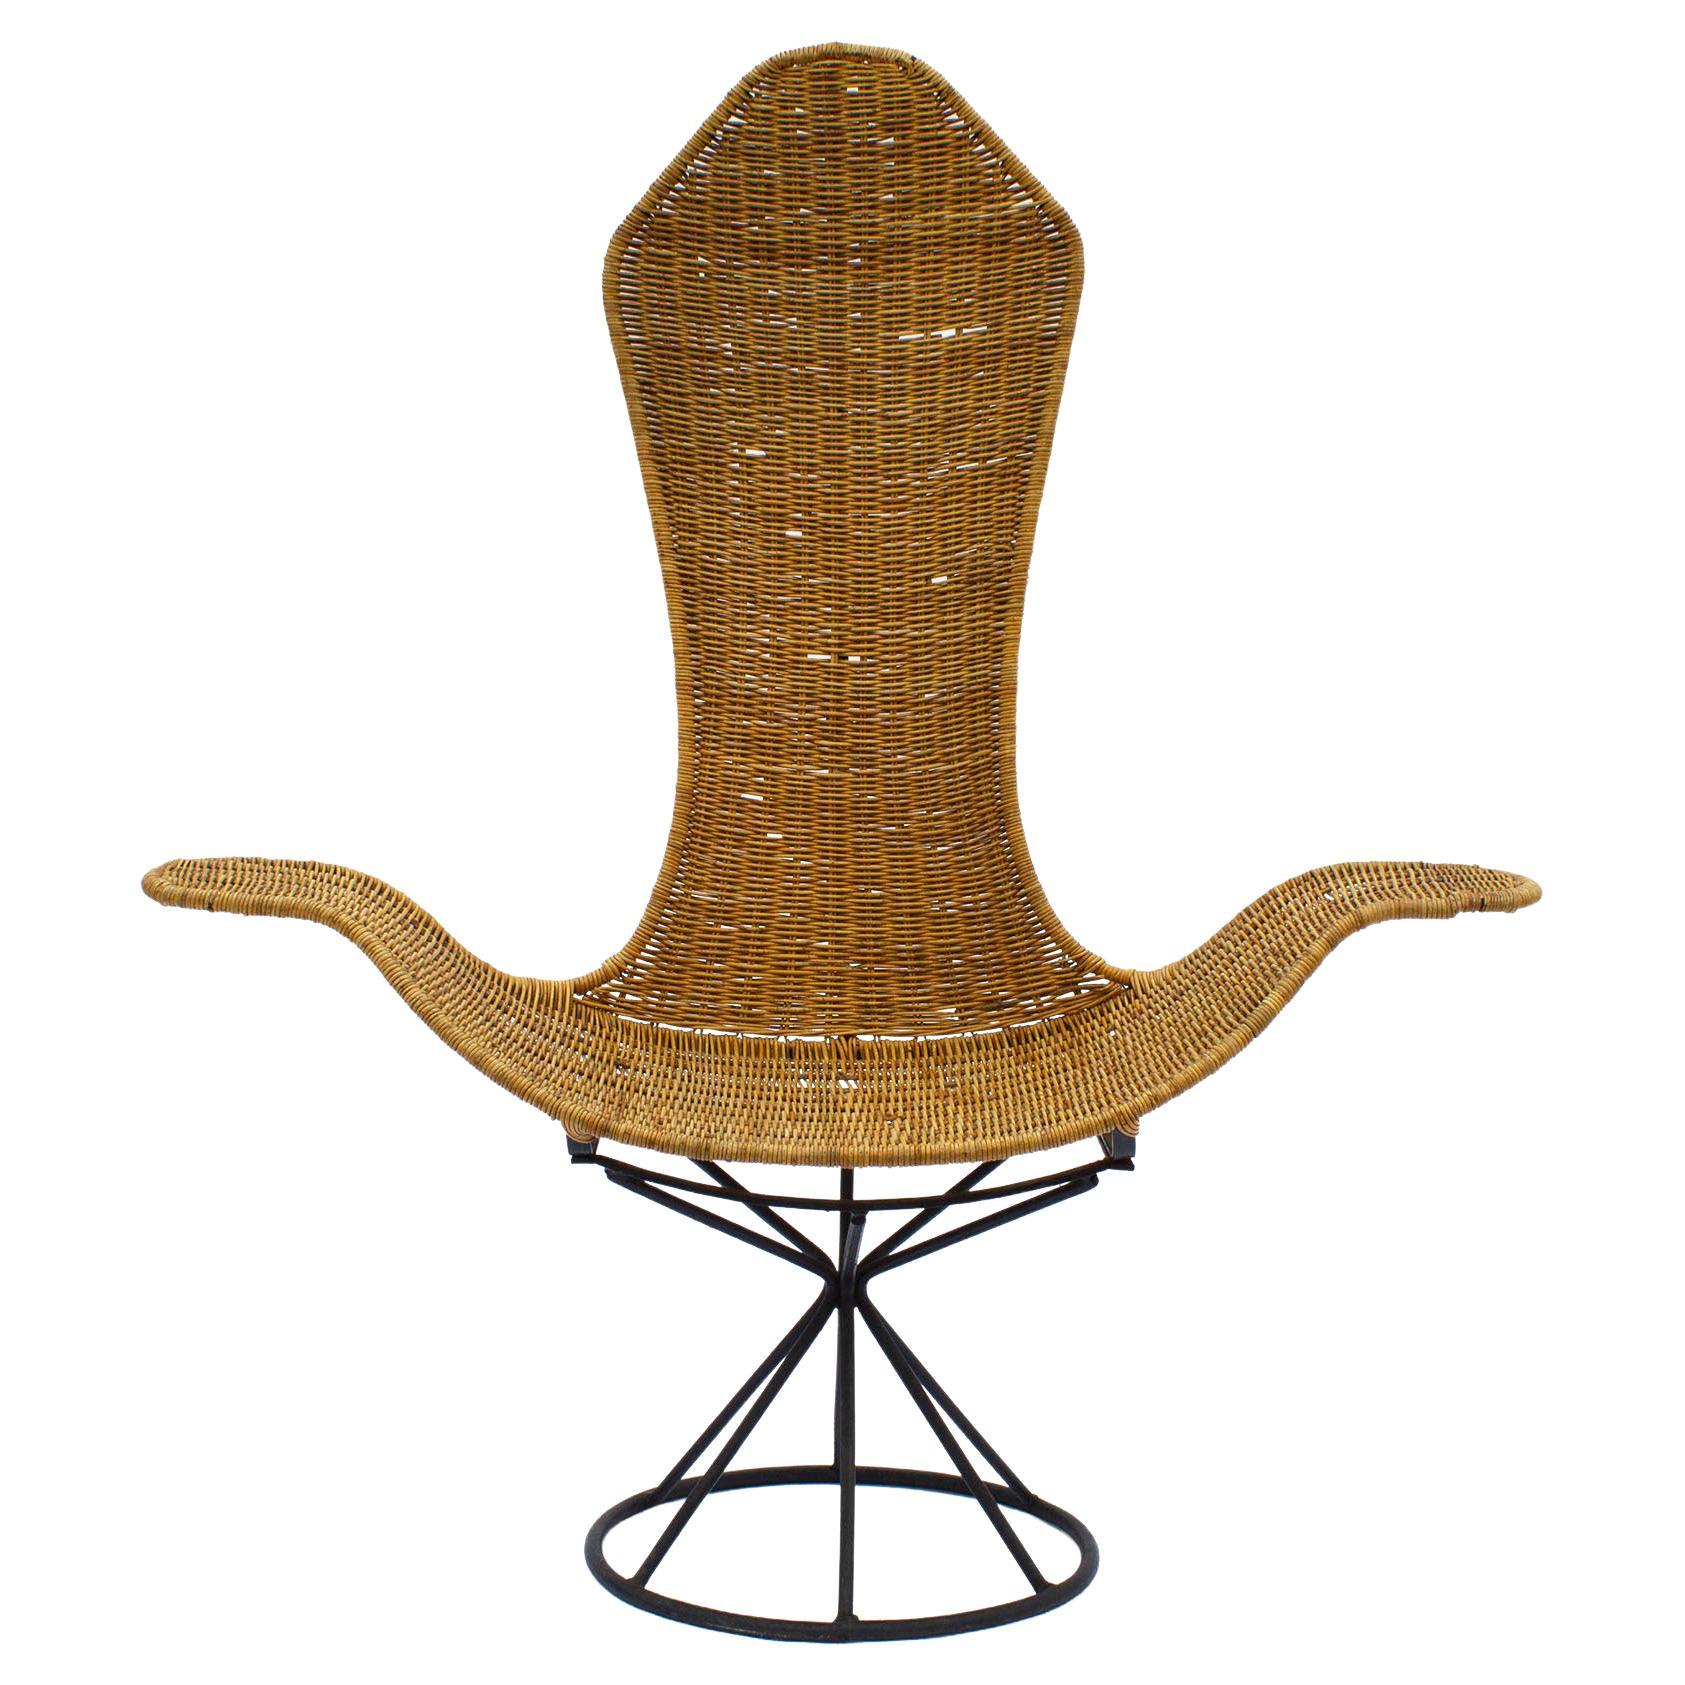 Danny Ho Fong Wave Chair for Tropi-Cal Rattan and Steel, 1960s